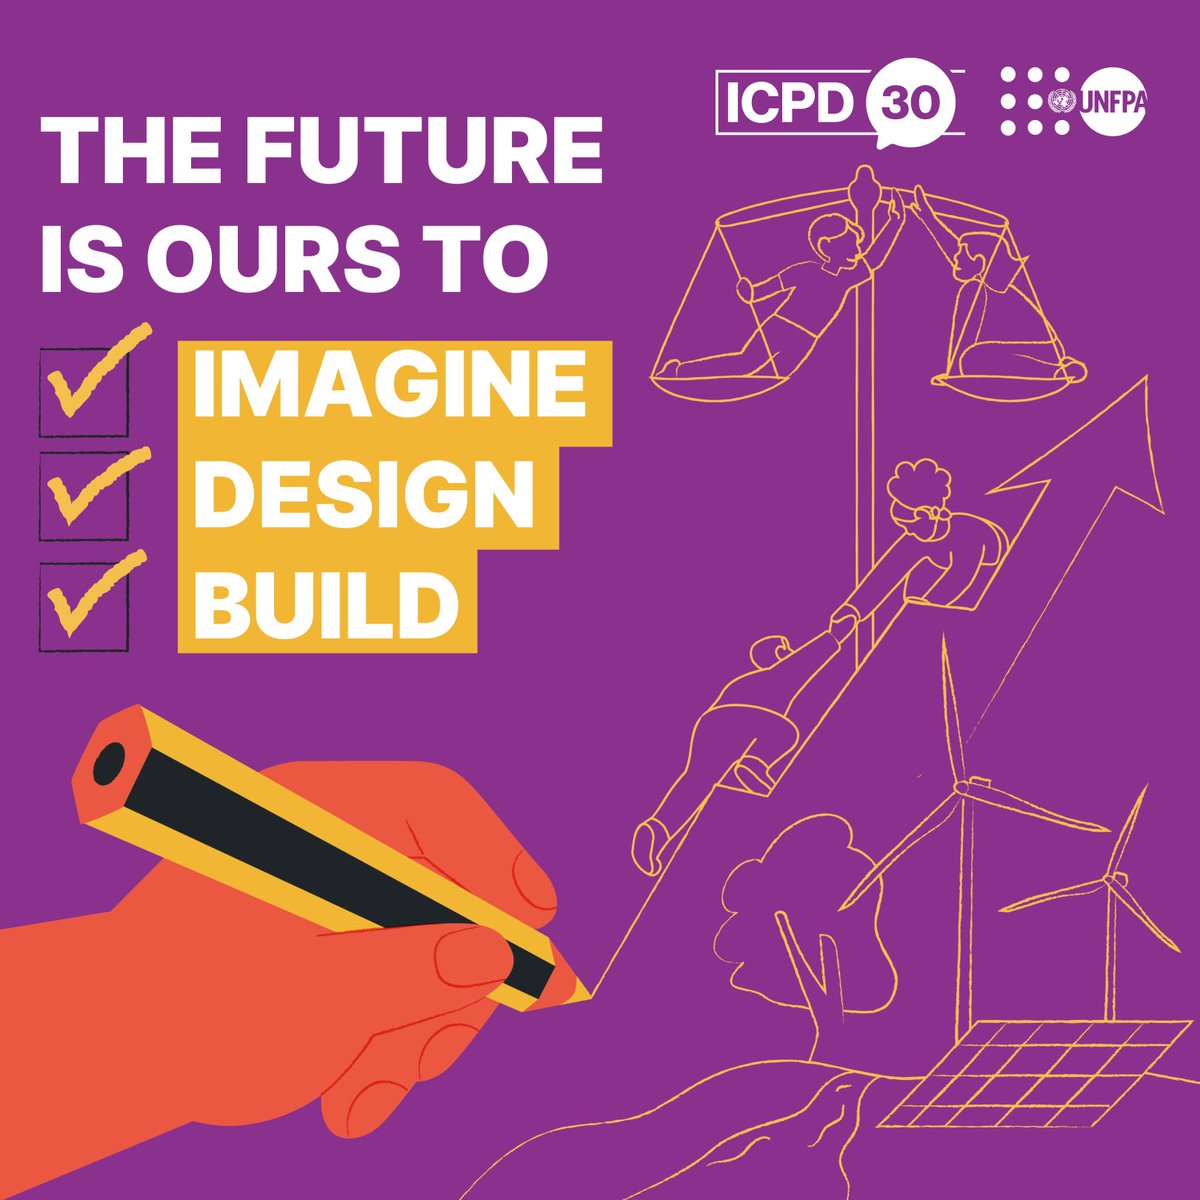 Five megatrends shaping our future: 

1) Demographic shifts
2) Climate change
3) Urbanization
4) Digital technologies
5) Persistent inequalities

Adaptation requires strategic planning, foresight, and robust data. Let's navigate these changes with precision and purpose. #ICPD30